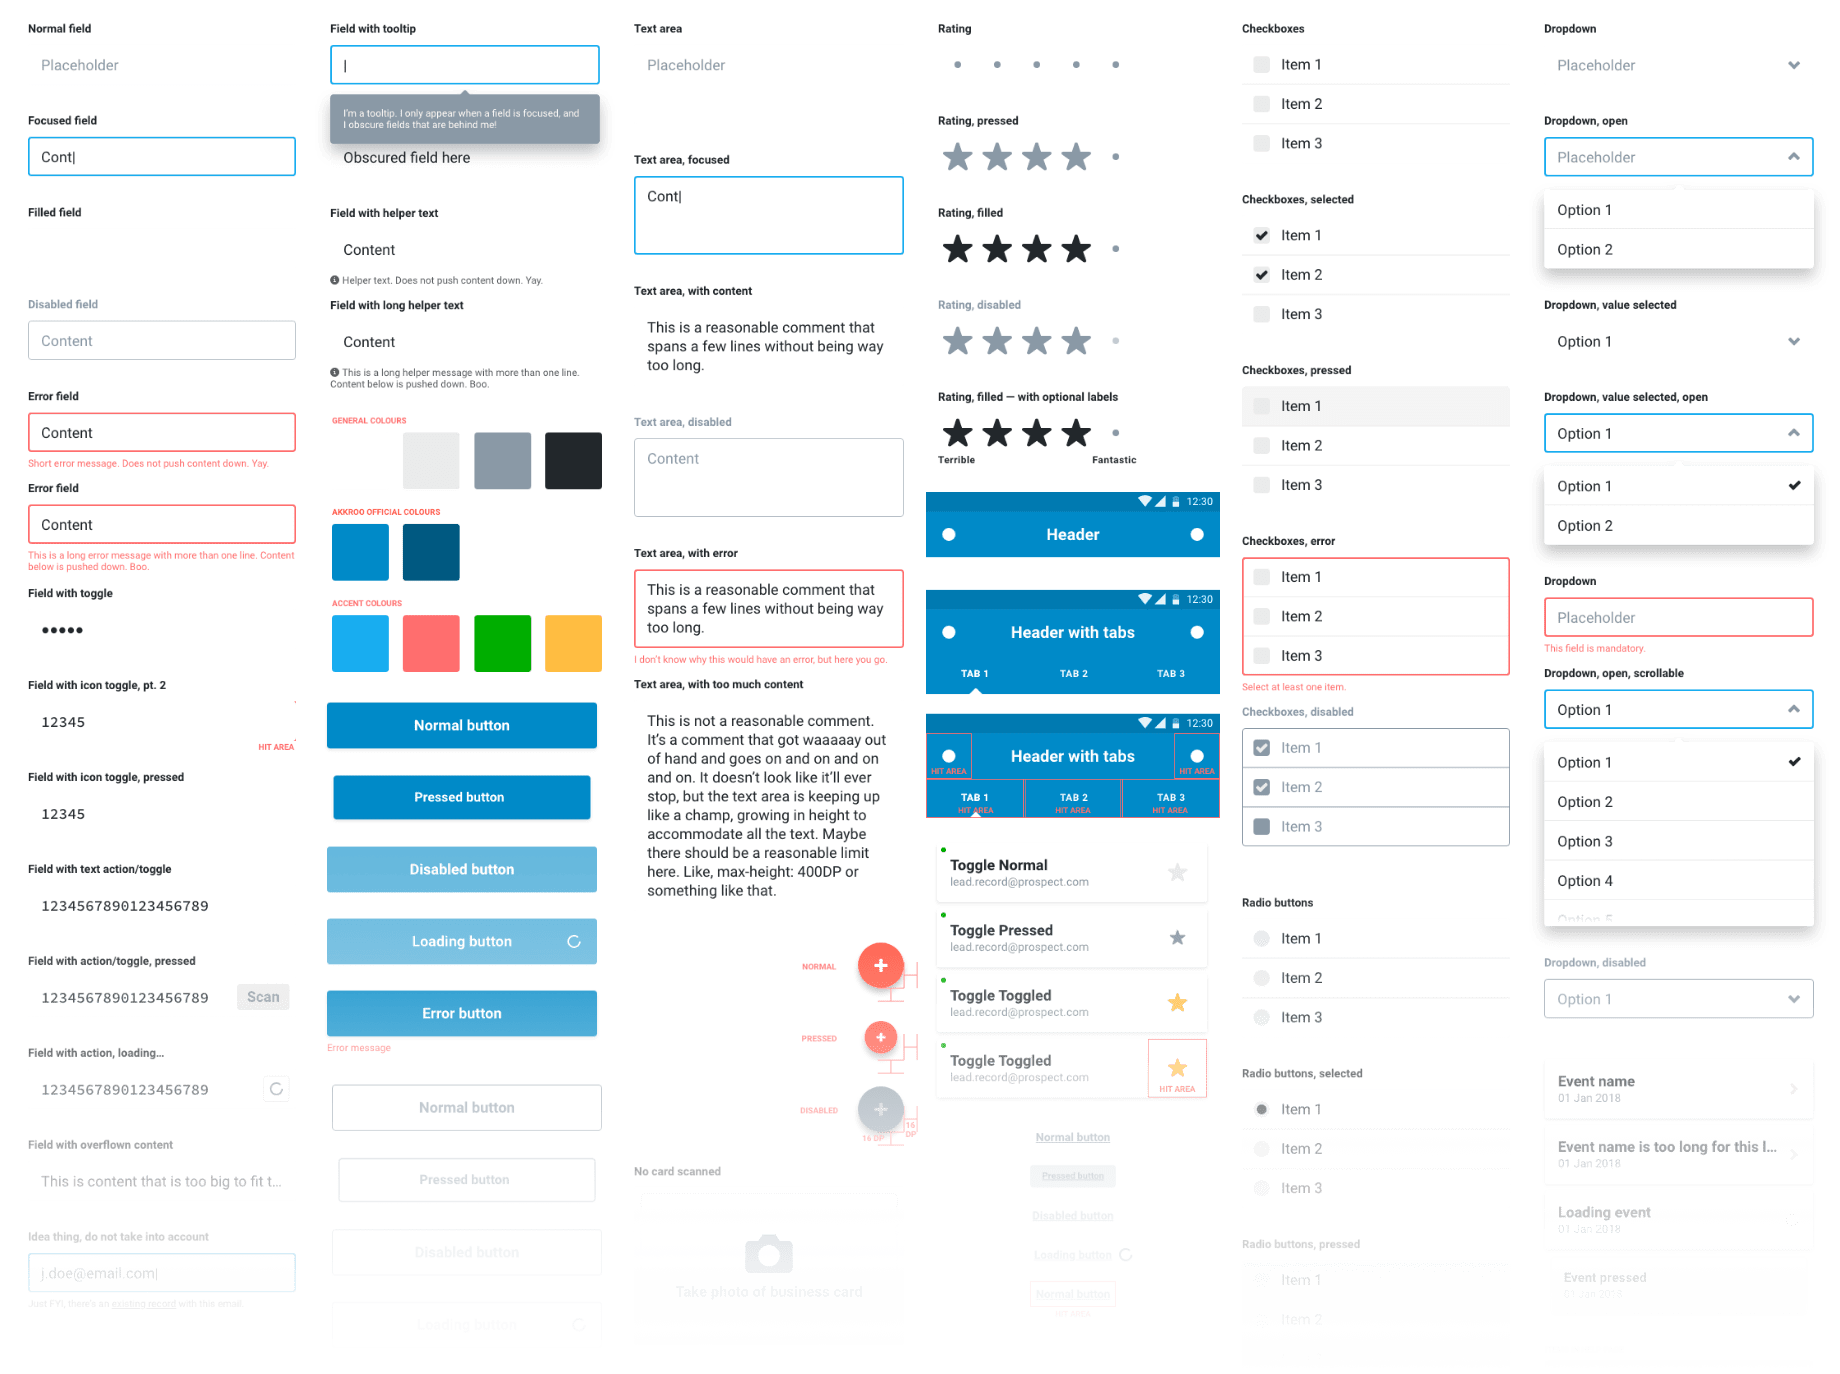 Some of the components designed for the app